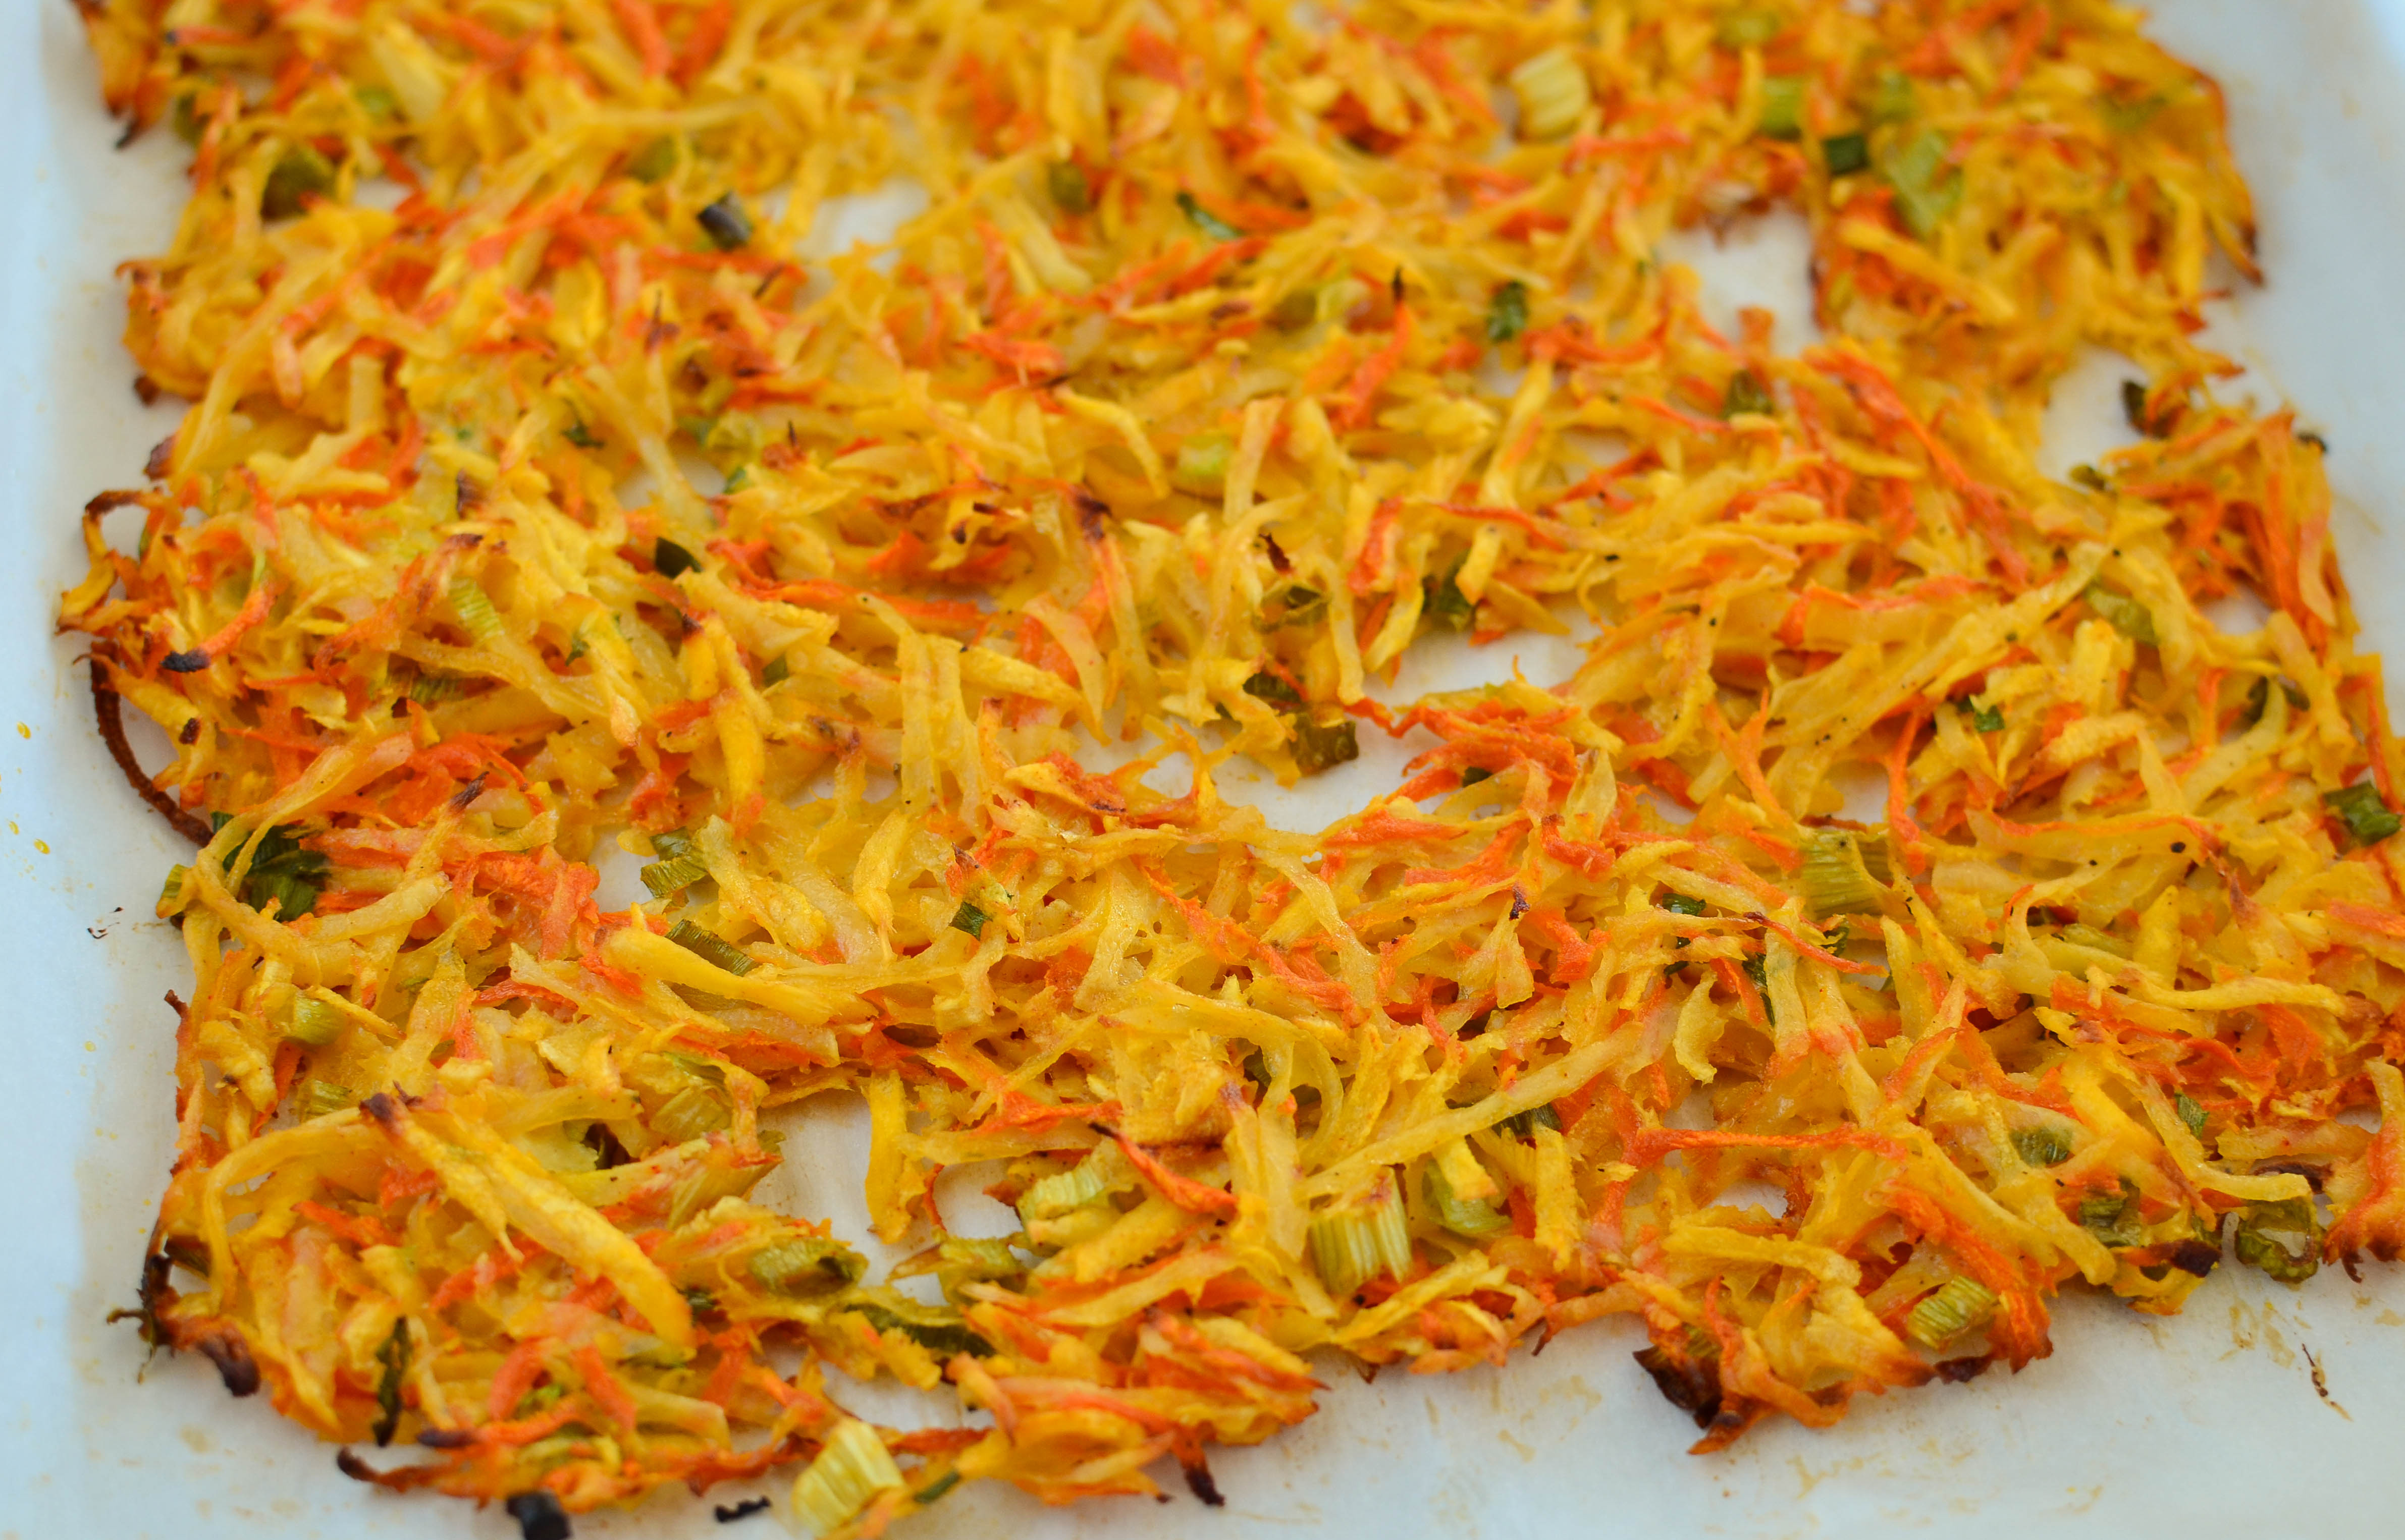 Slimming Eats - Carrot, Parsnip and Potato Hash - gluten free, dairy free, whole30, paleo, vegetarian, Slimming Eats and Weight Watchers friendly